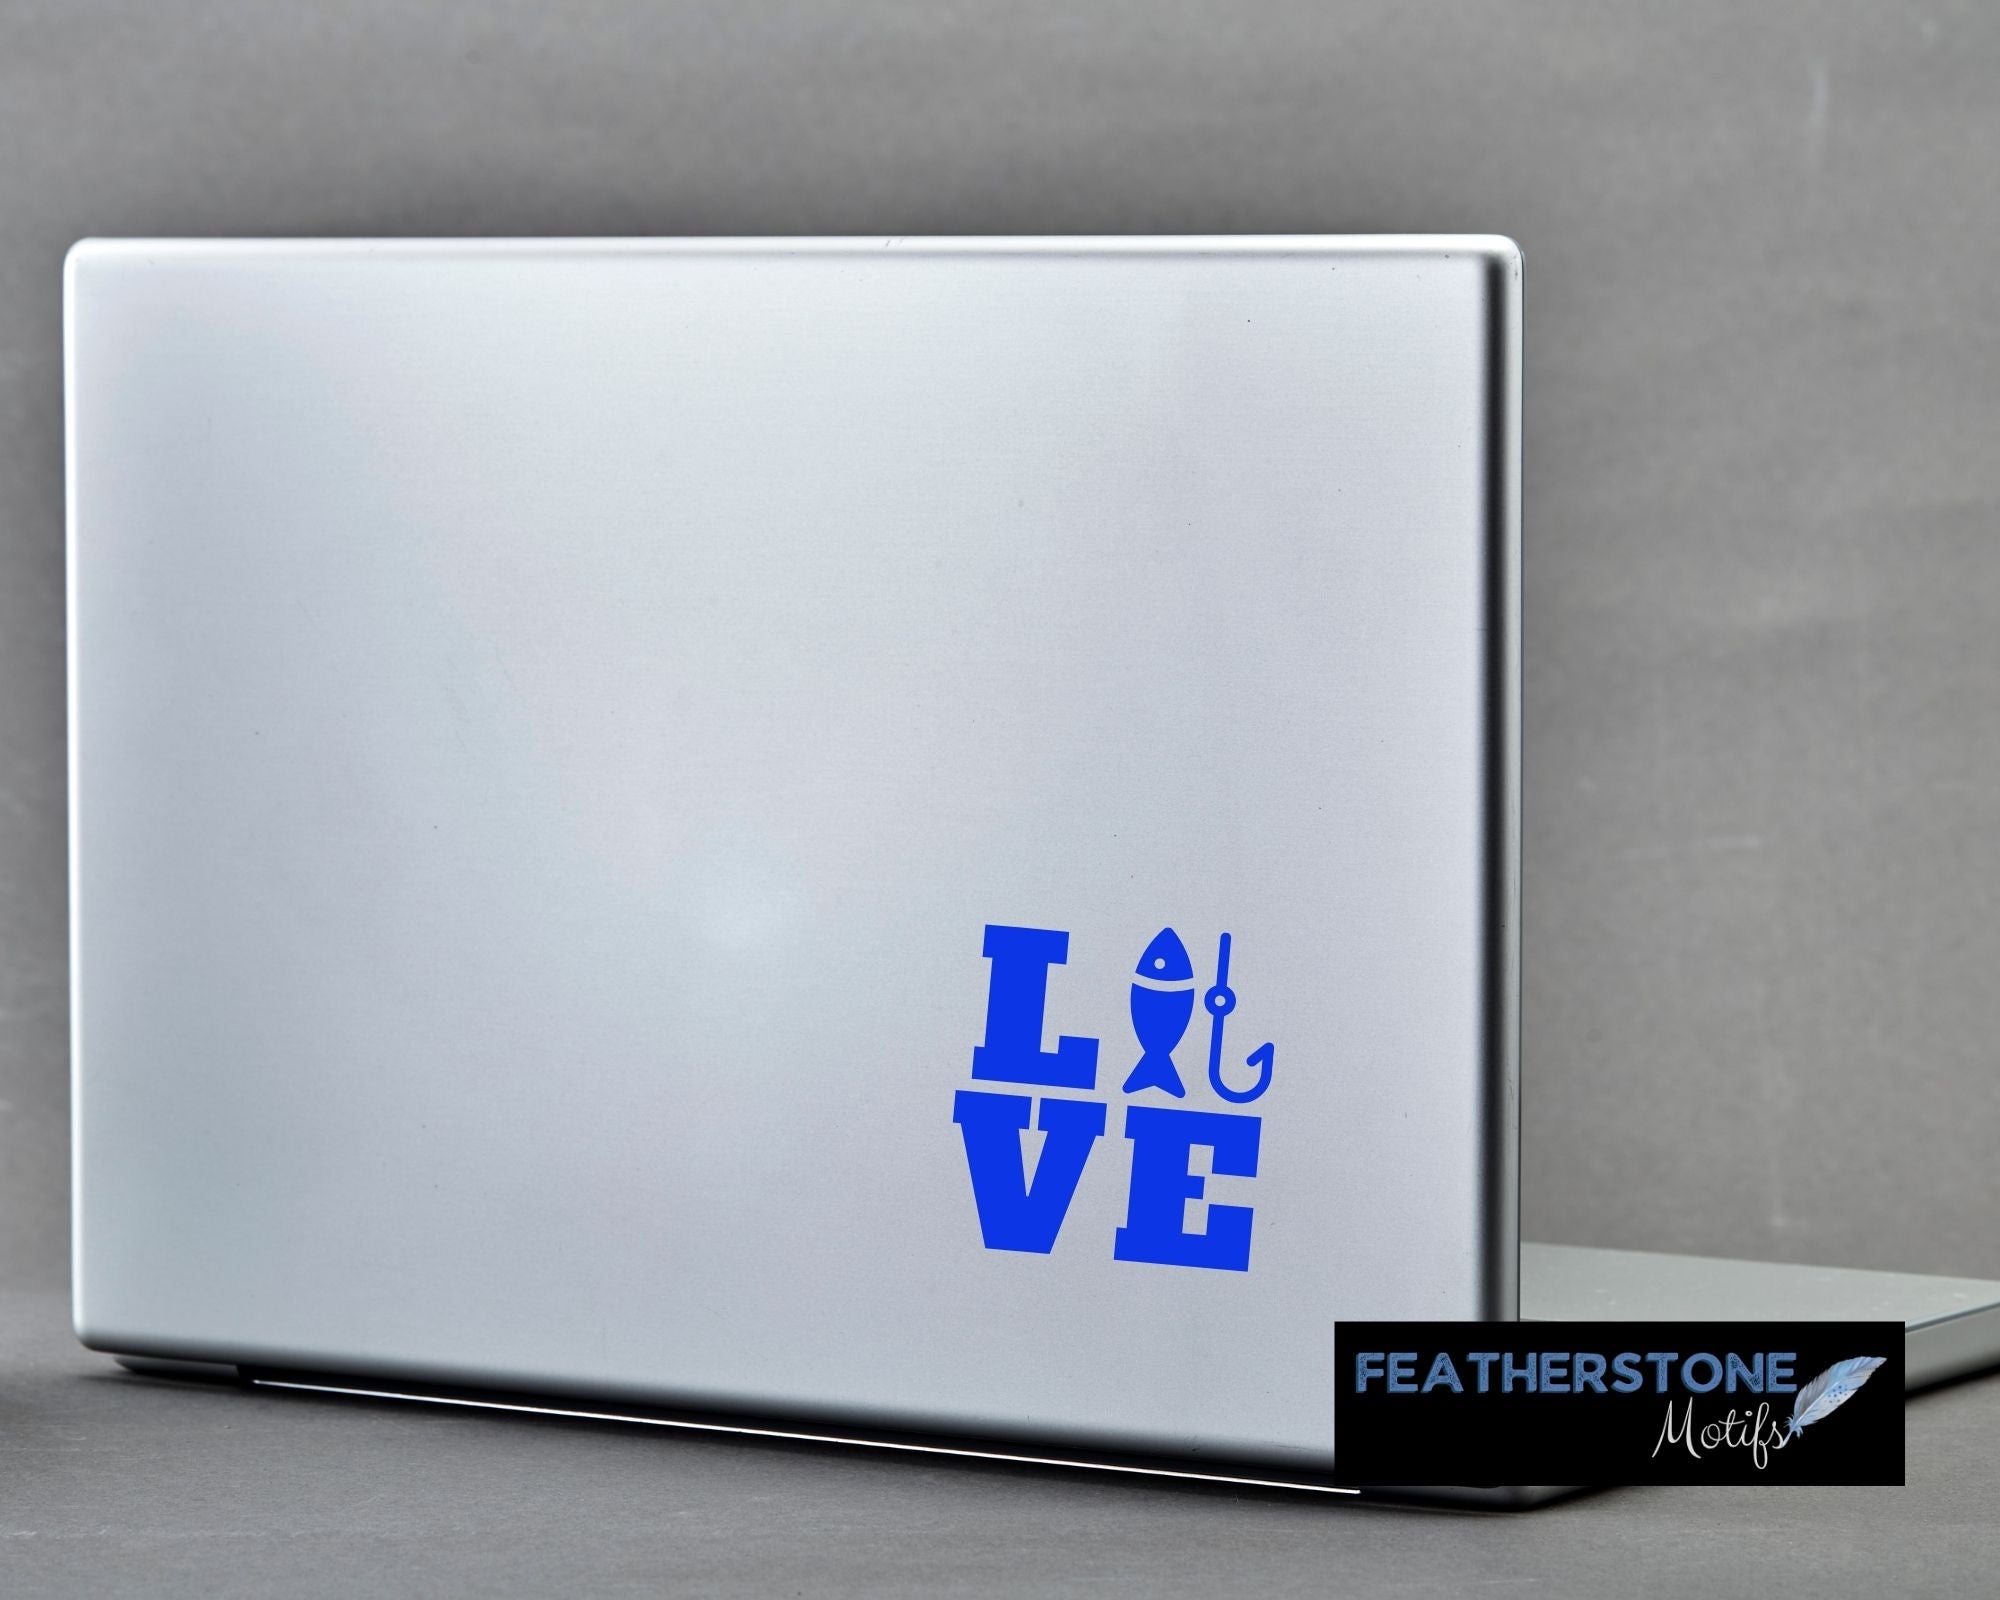 Love the fishing? Then show it with this fishing love square vinyl decal! Available in 4 sizes and 10 colors, these vinyl decals make great gifts for everyone. This image shows the Fishing Love Square vinyl decal on the back of an open laptop.